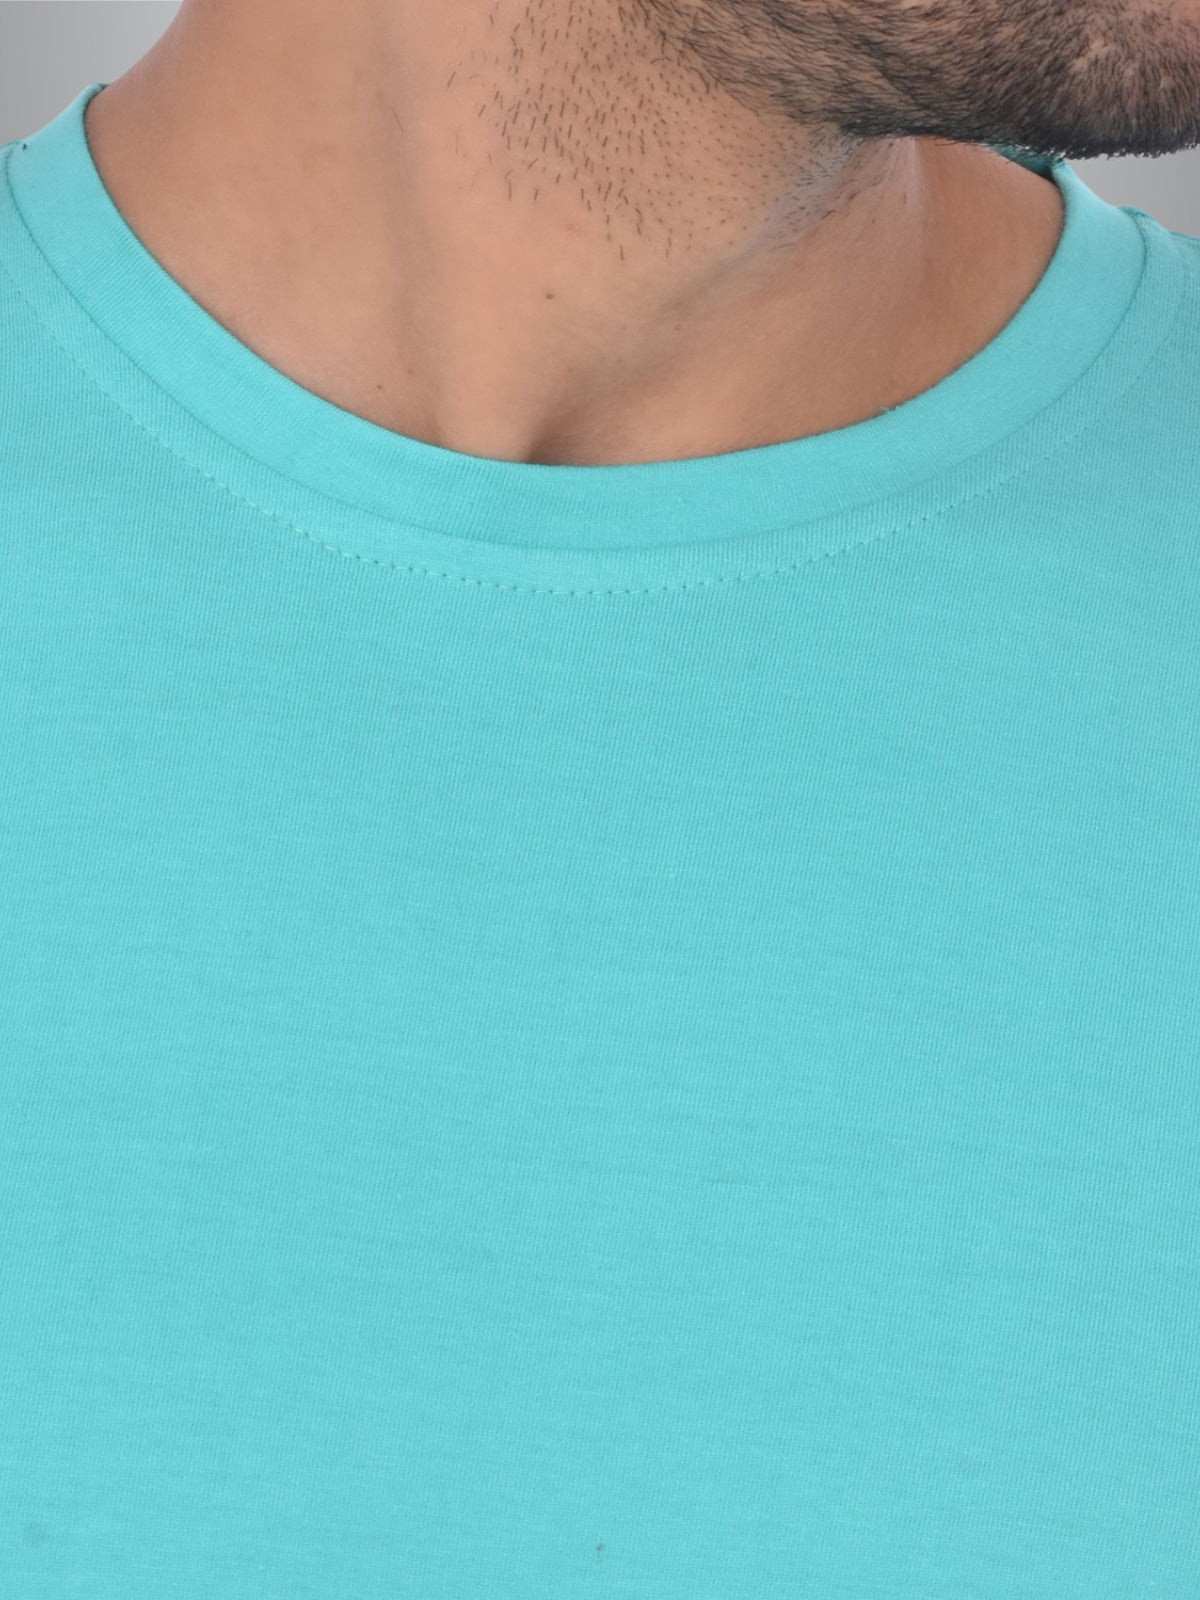 Mens Solid Round Neck  Half Sleeve Cotton Blend Turquoise T-shirt